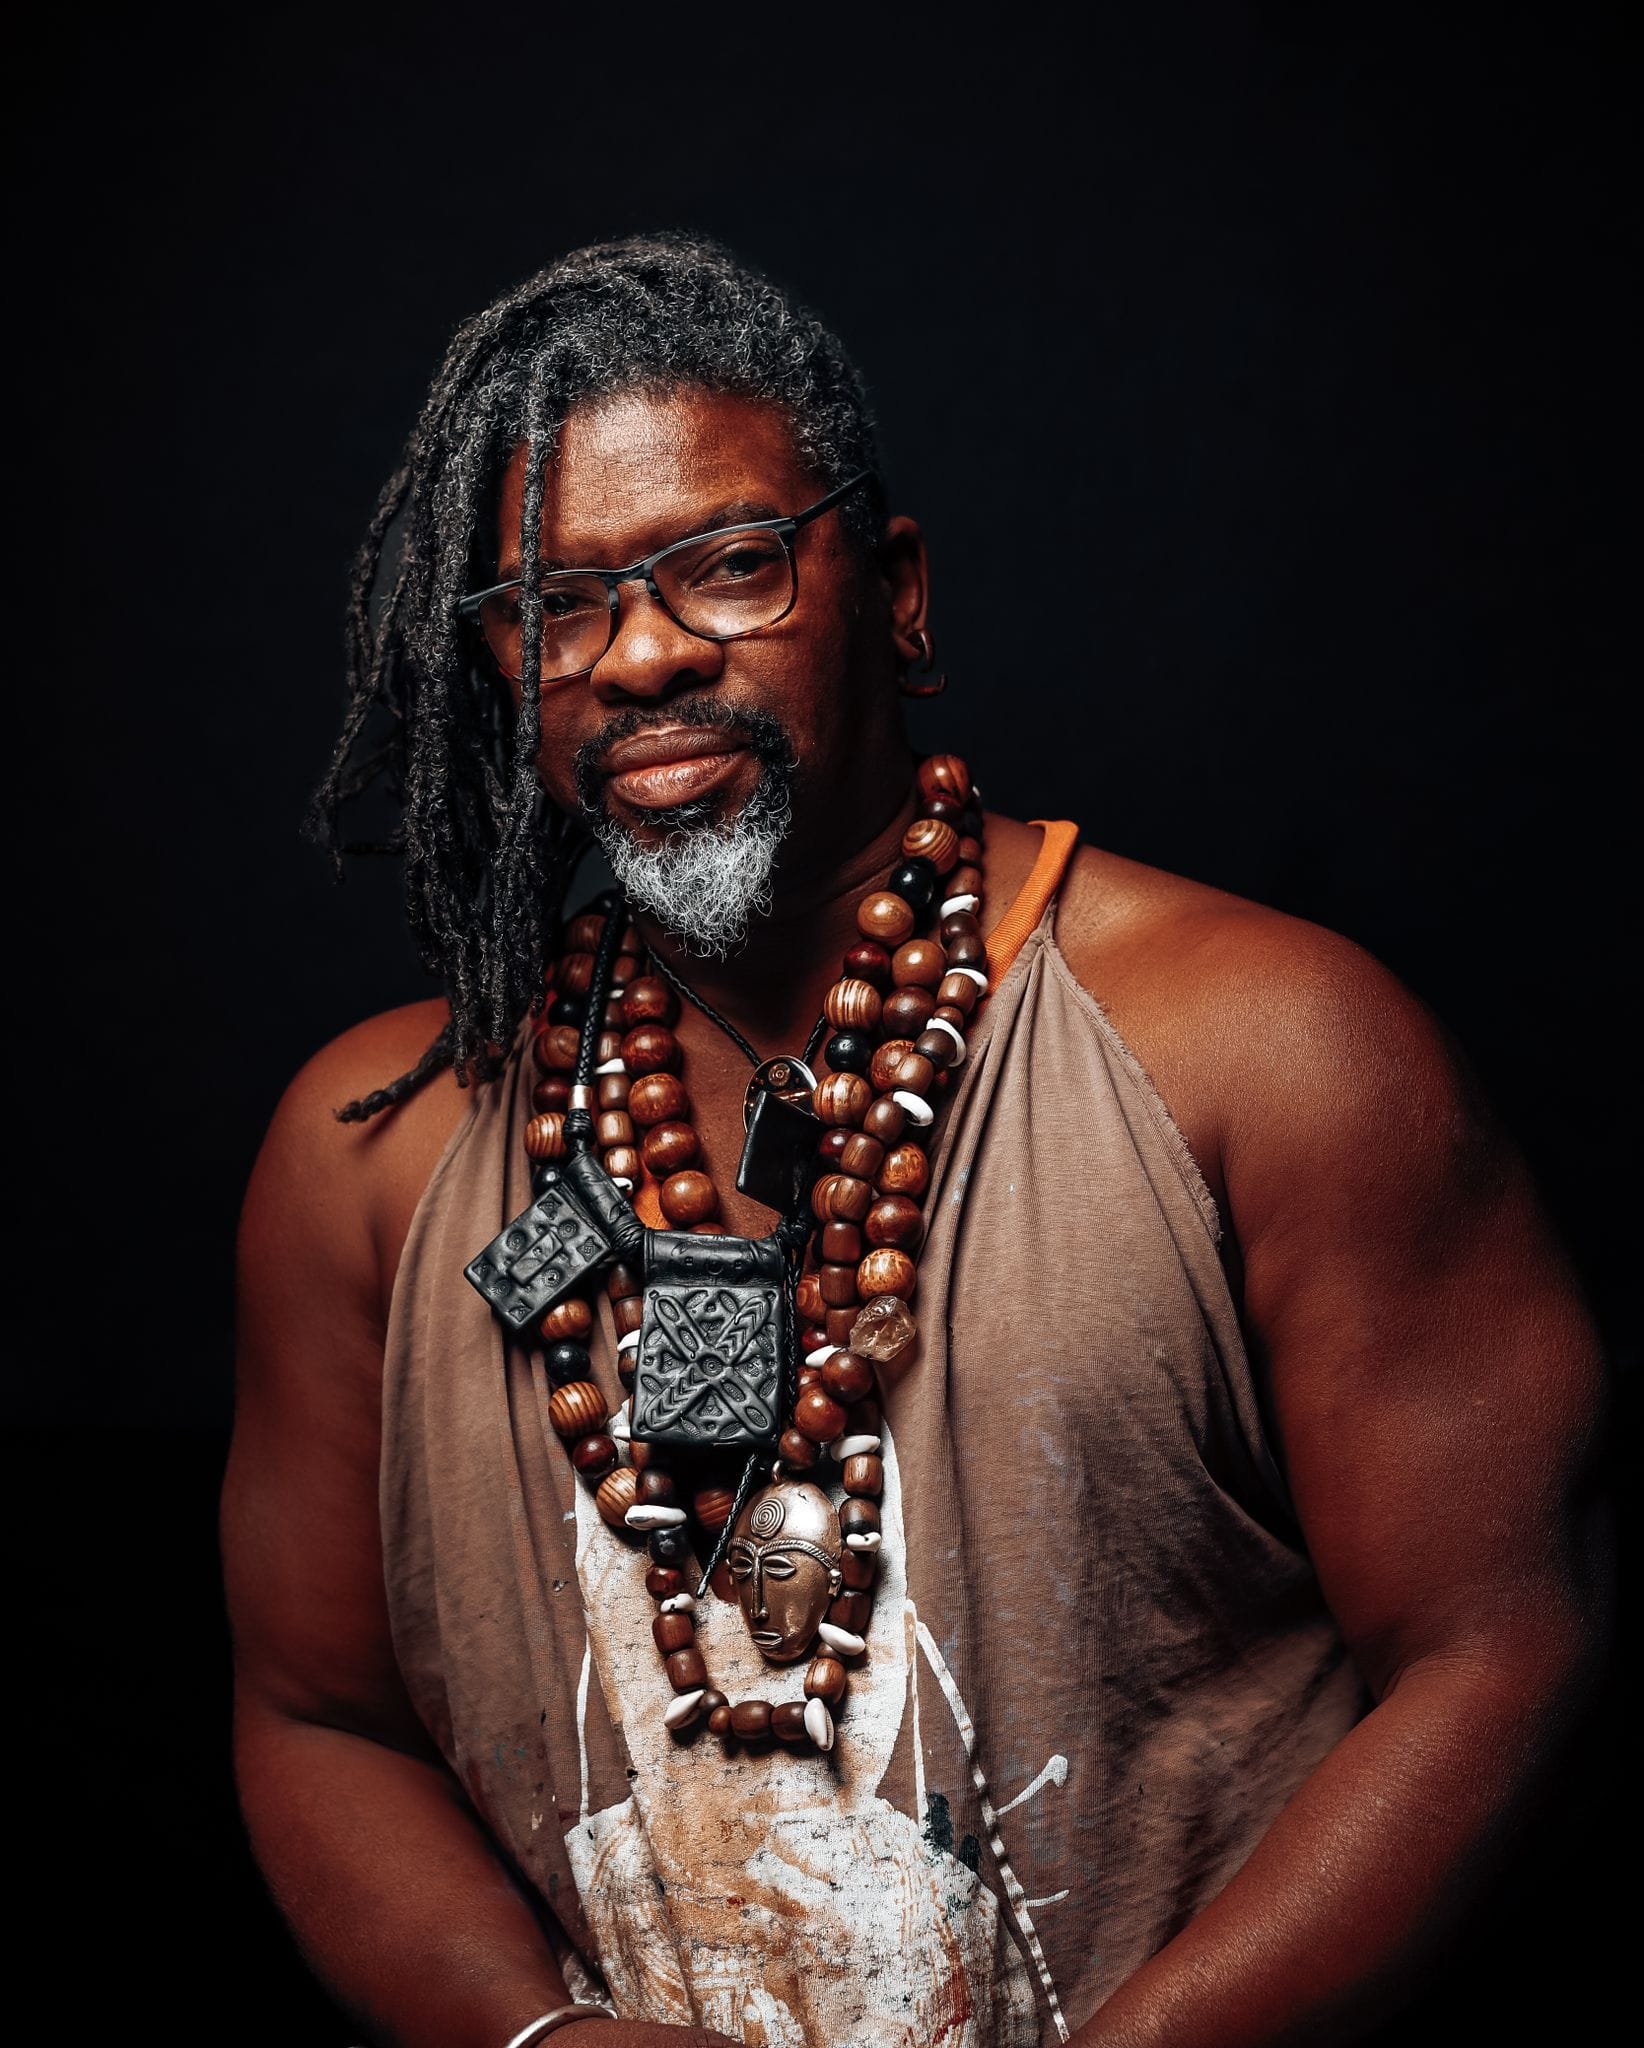 Photo of Baruti. He is an African American man with shoulder length dreads and a graying goatee. He is wearing a paint stained brown tank top and bead necklaces.